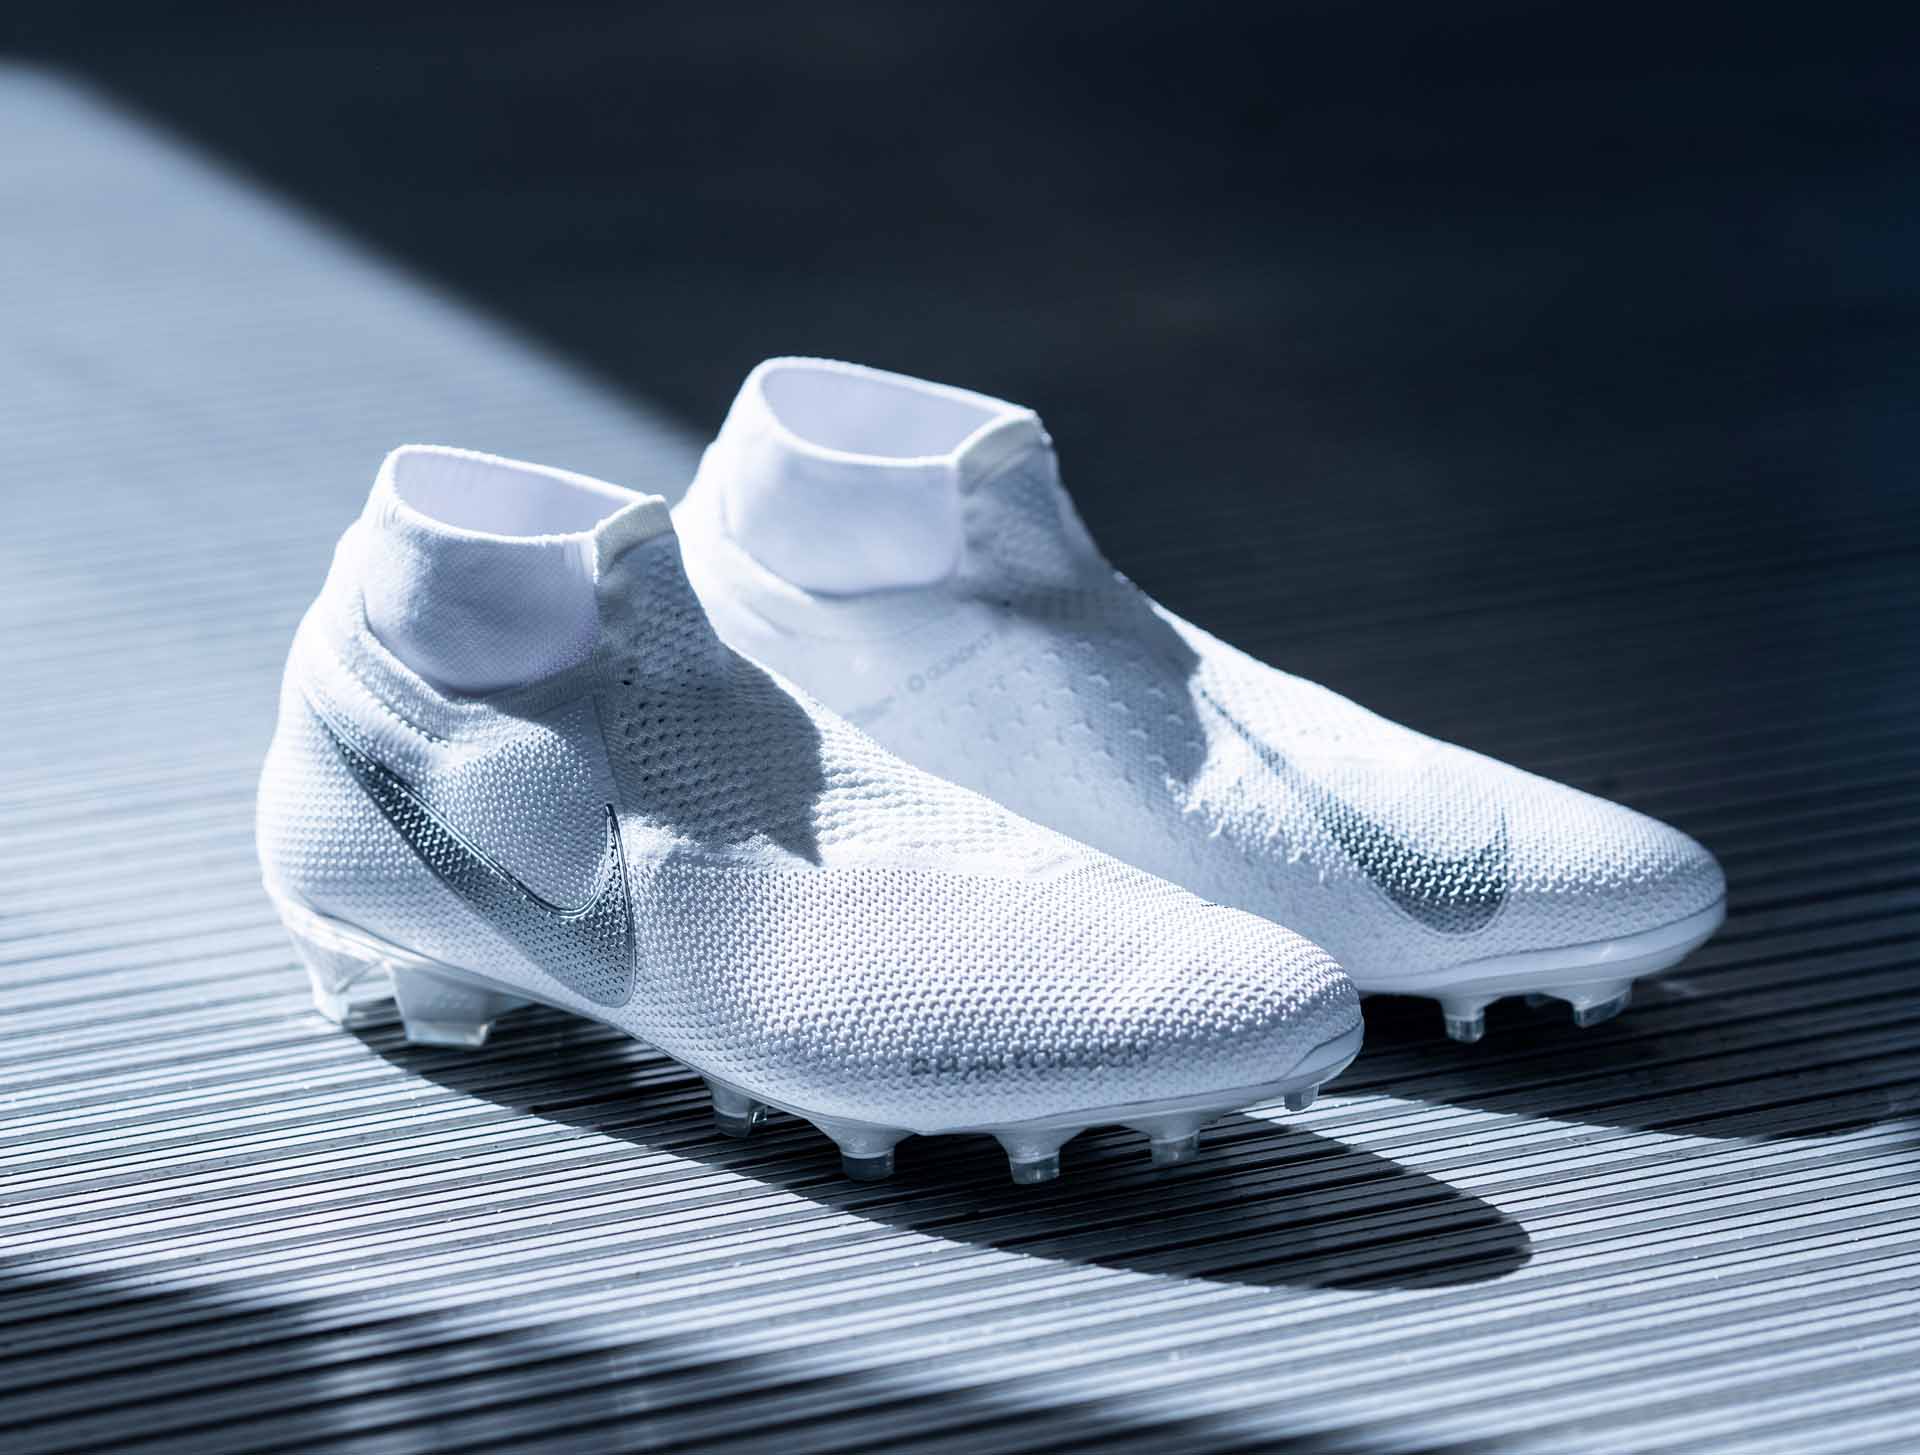 Nike Launch The 'Nuovo White Pack' Football Boots SoccerBible